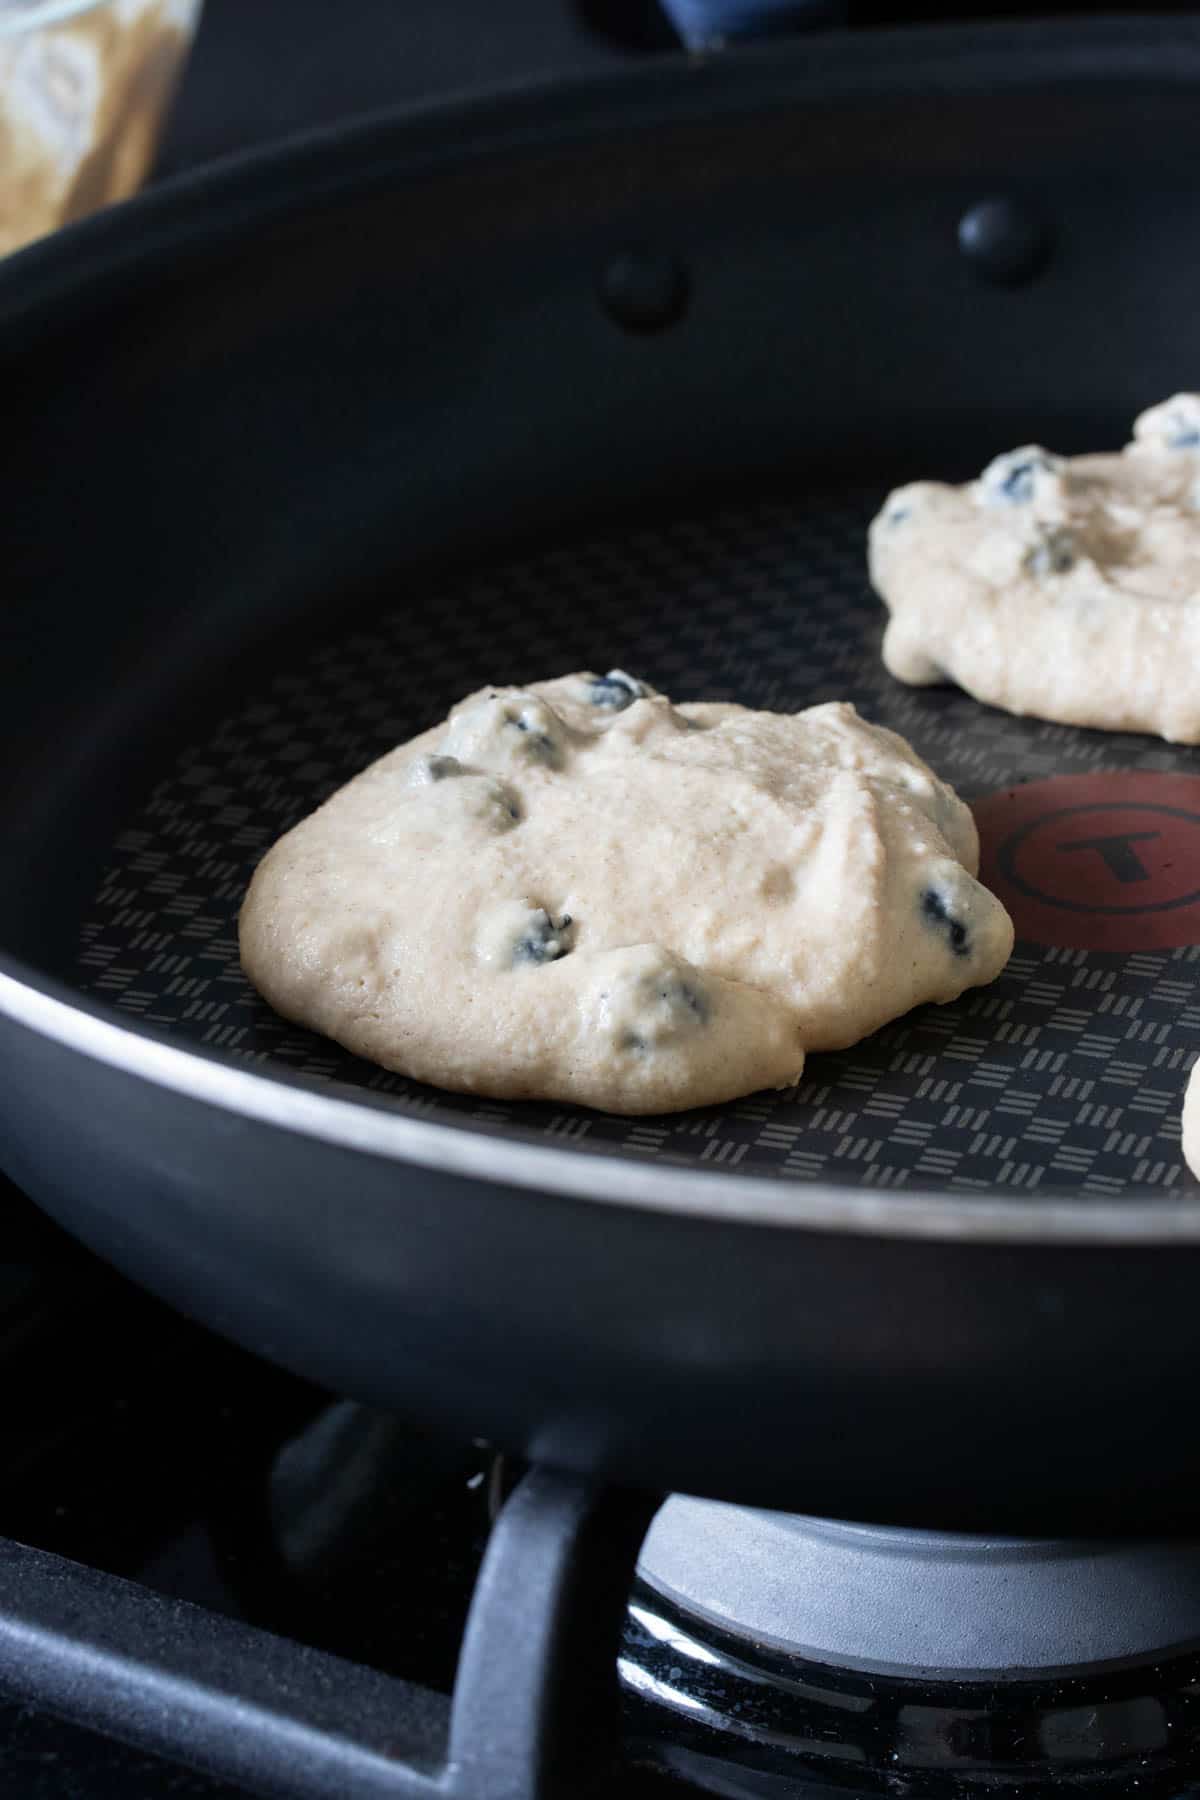 Blueberry pancakes being cooked on a black pan